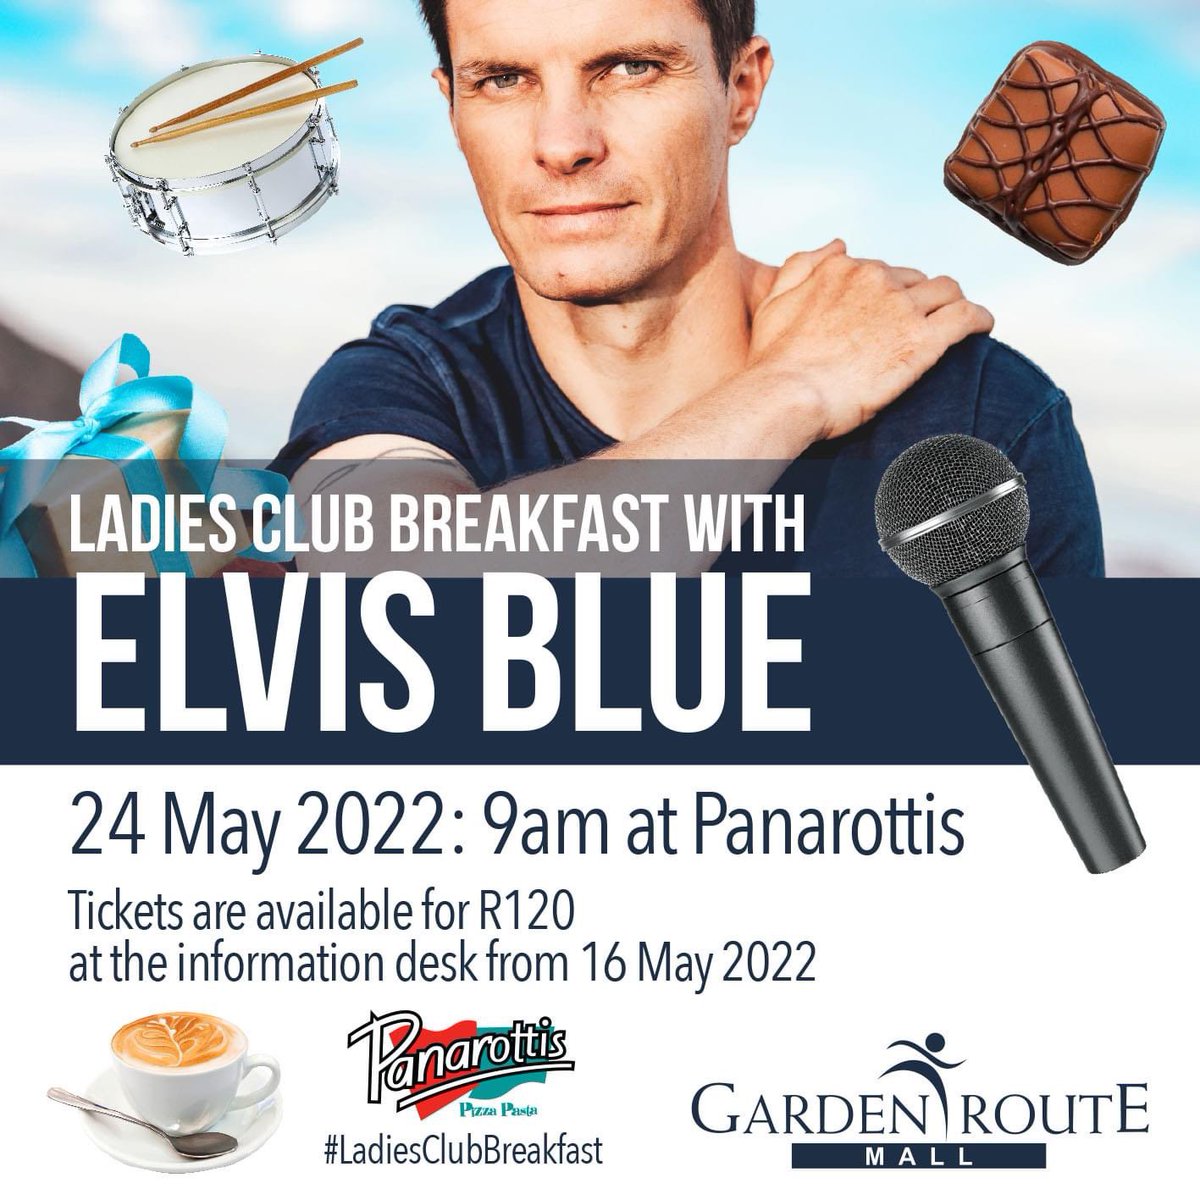 Ladies Club breakfast with @elvisbluemusic 💃🎬❤️ Join us on the 24th of May 2022 at @panarottis with our celebrity guest artist Elvis Blue. Tickets available from the 16th of May 2022 at the information desk for R120. #LadiesClubBreakfast #GardenRouteMall #ElvisBlue